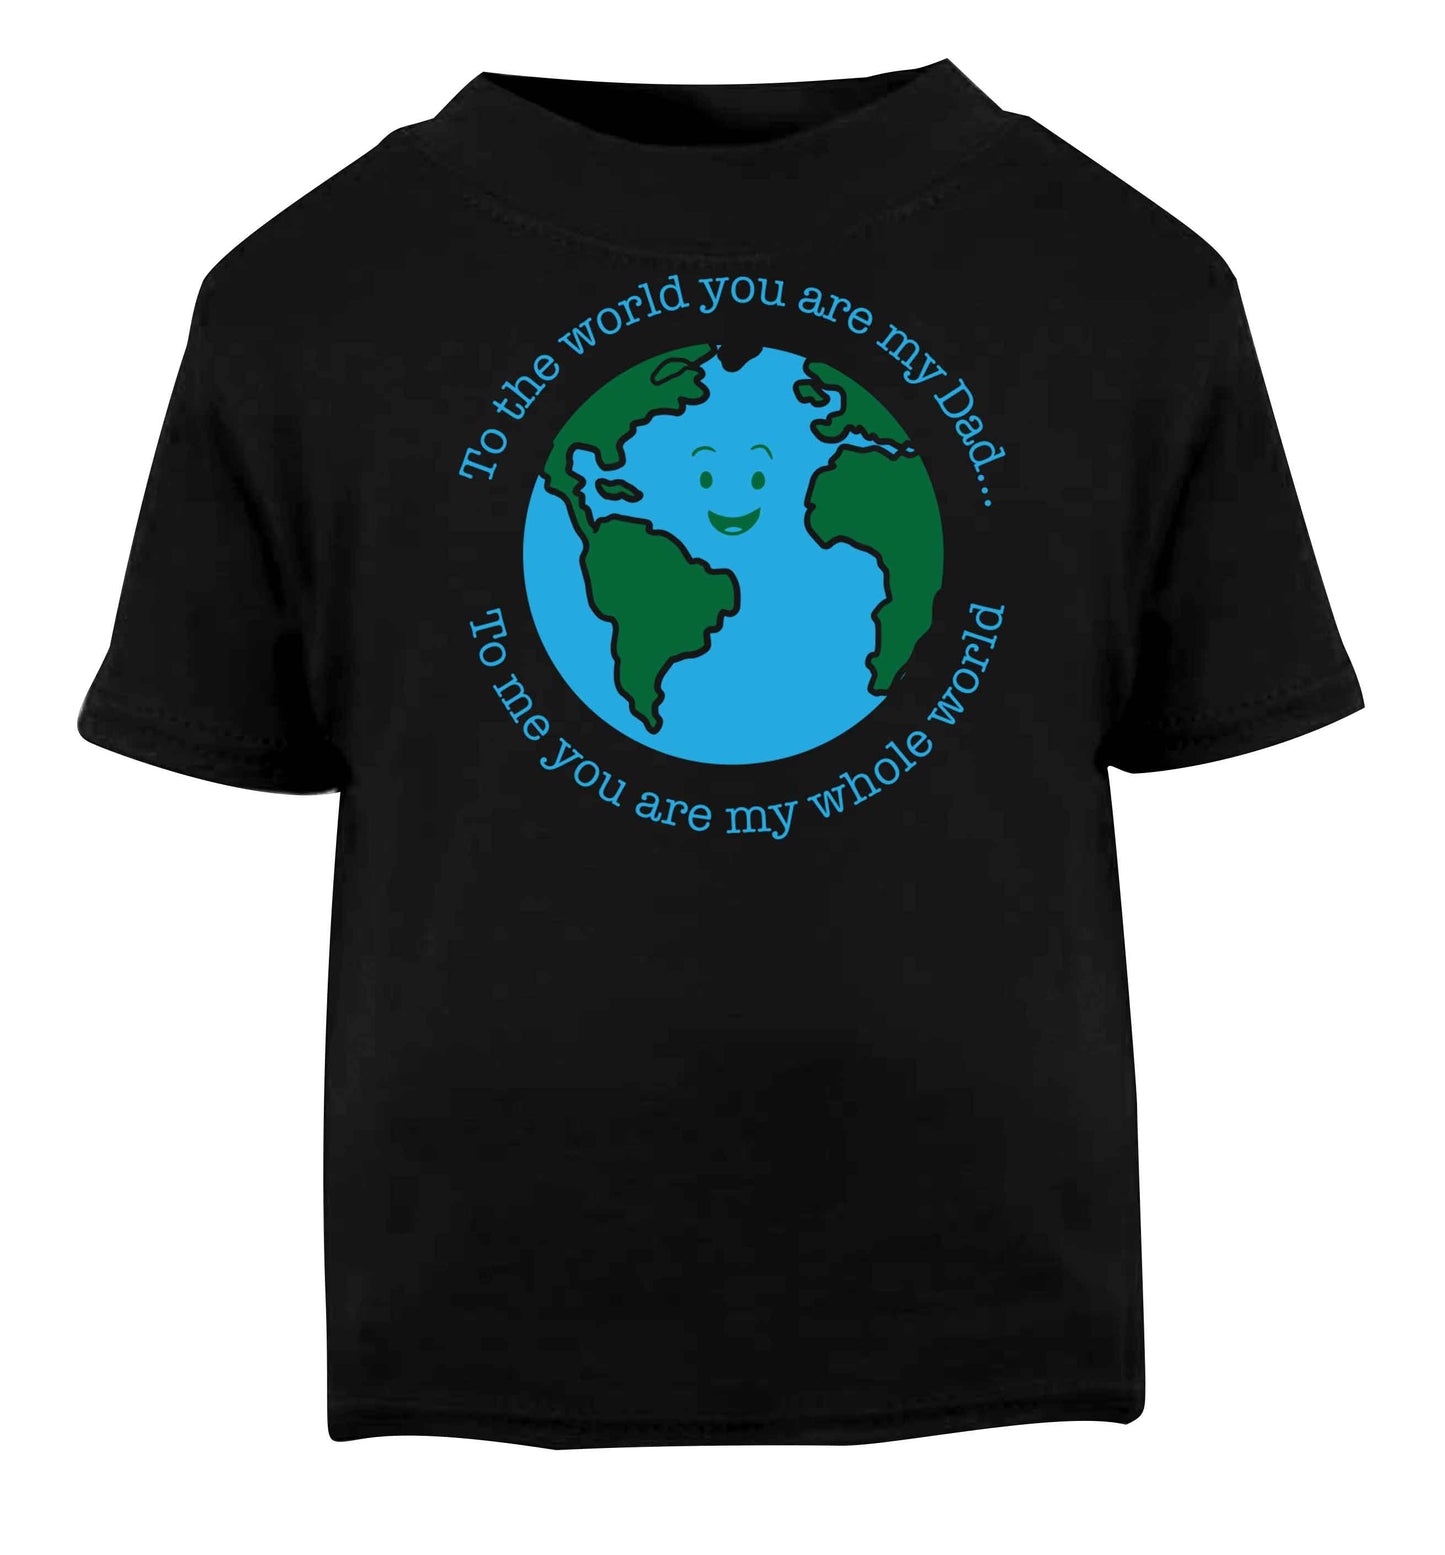 To the world you are my dad, to me you are my whole world Black baby toddler Tshirt 2 years